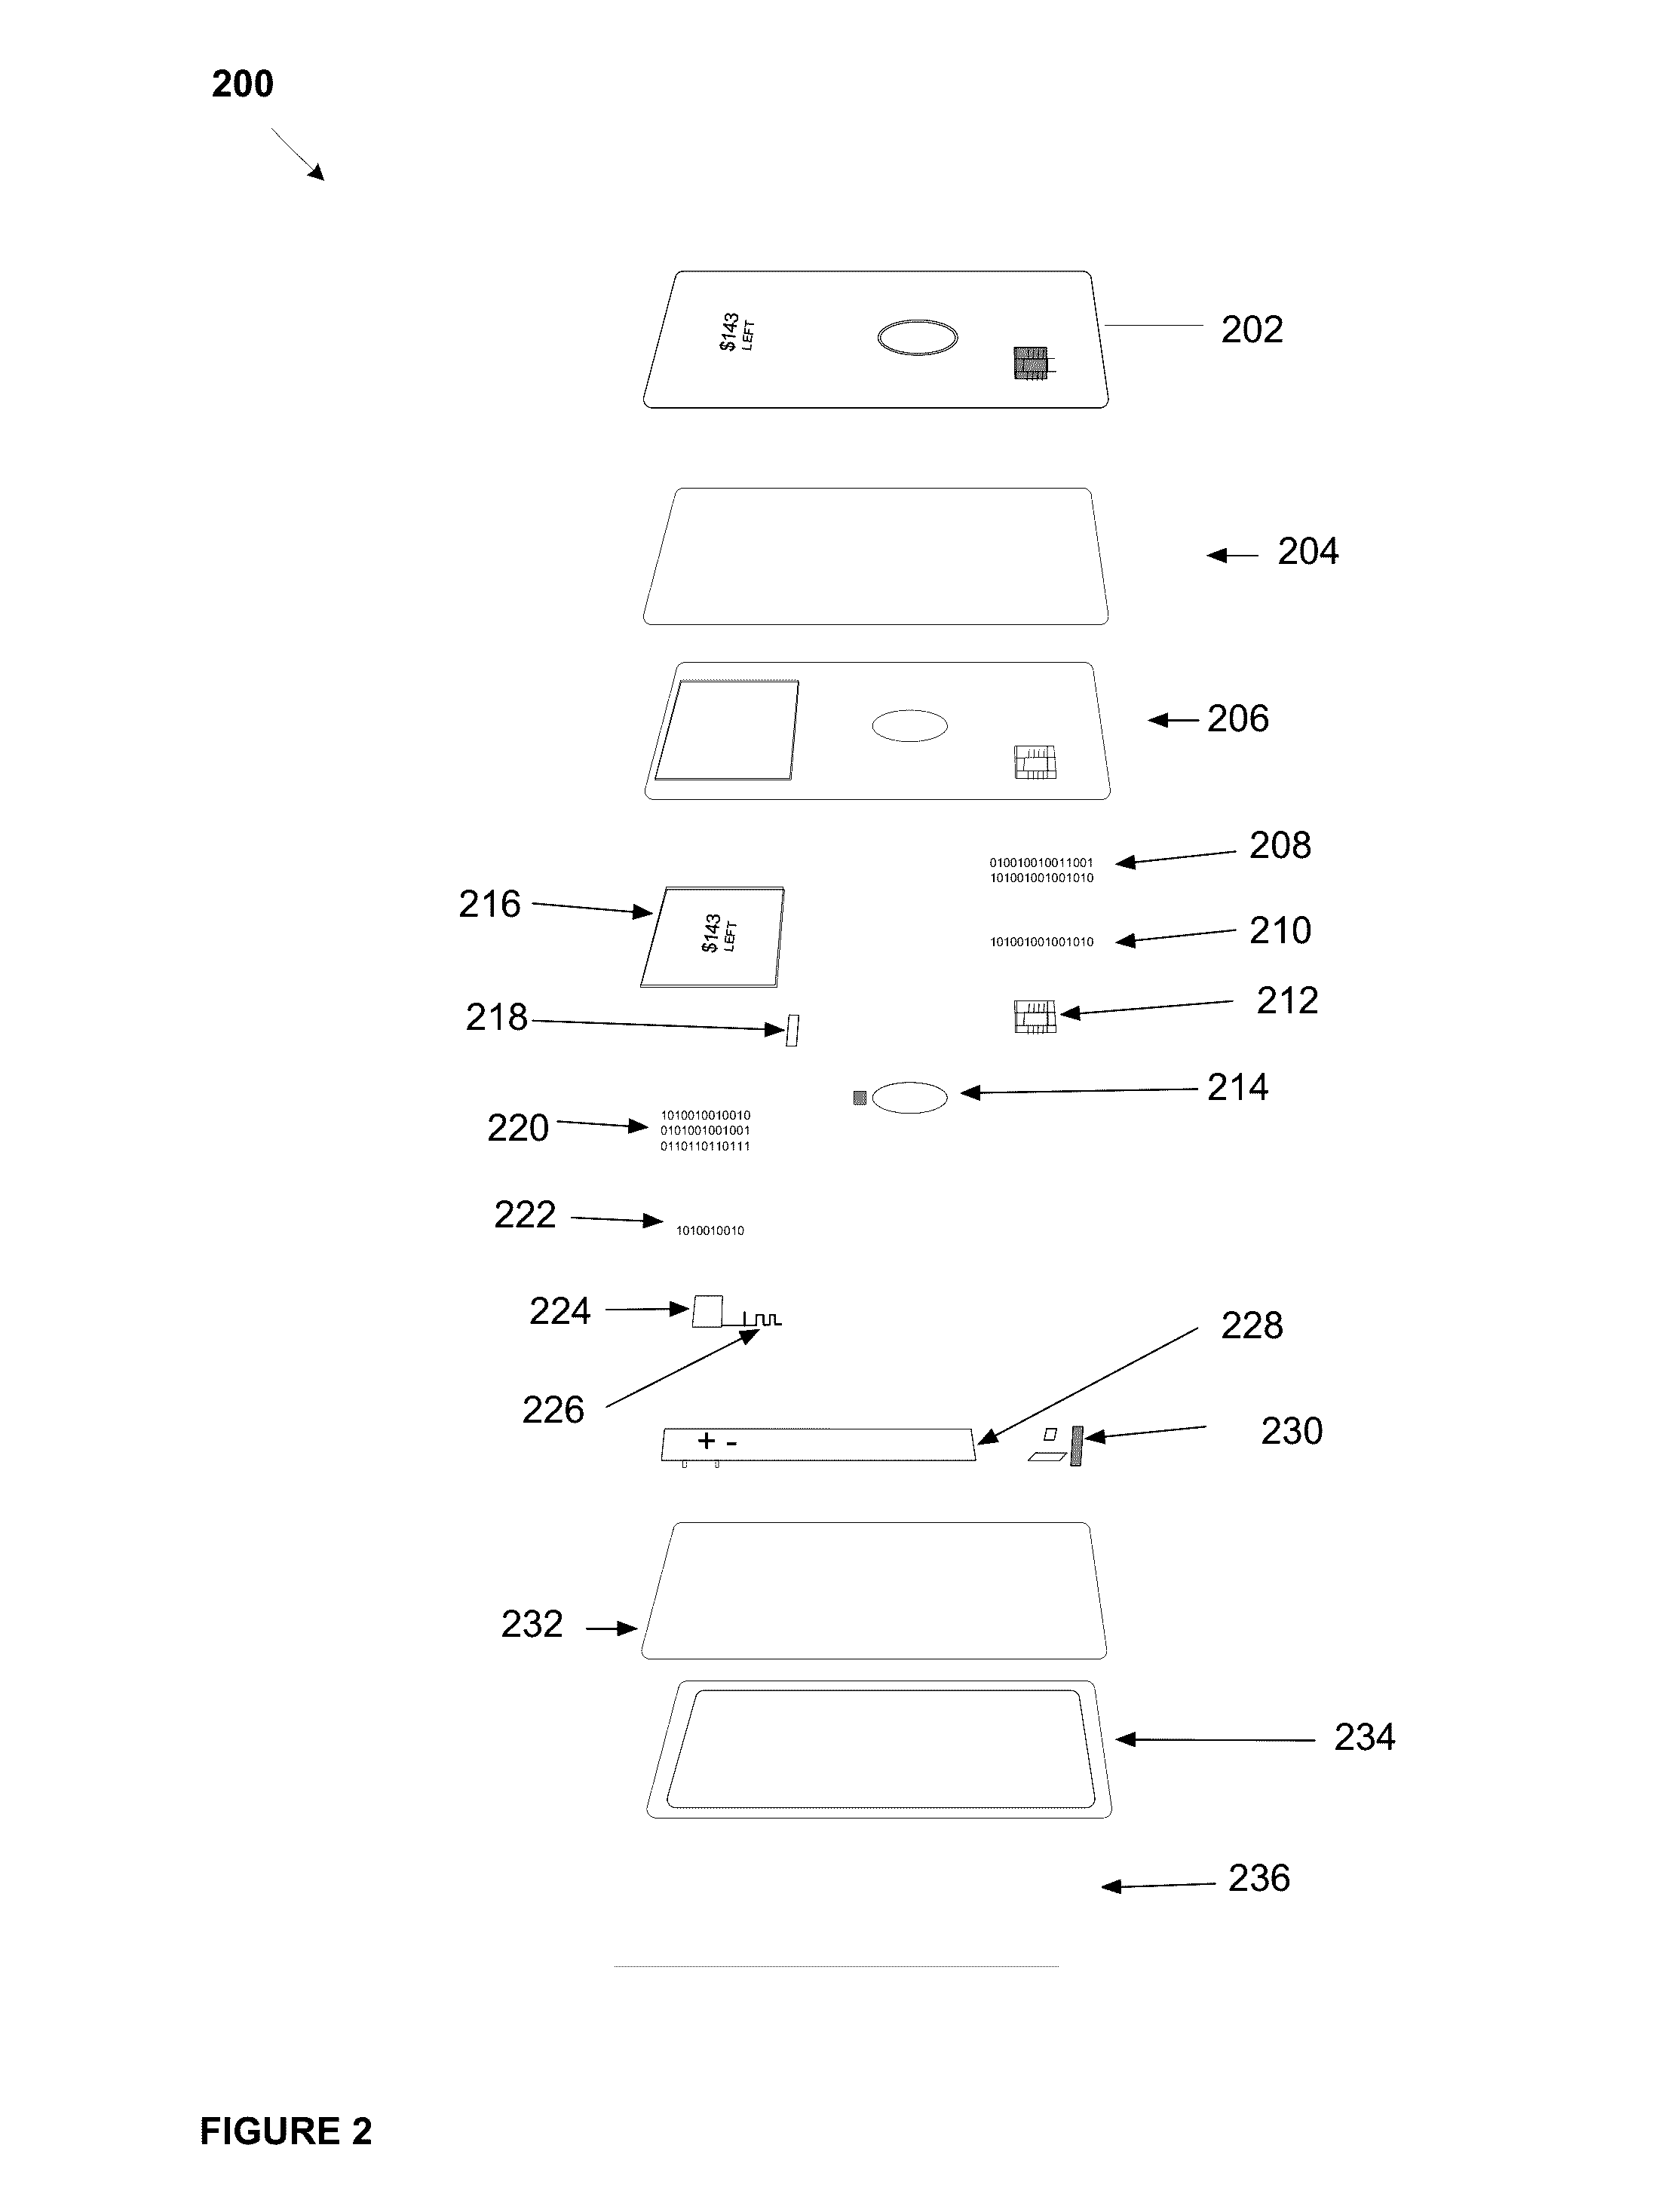 System, method, and apparatus for a dynamic transaction card